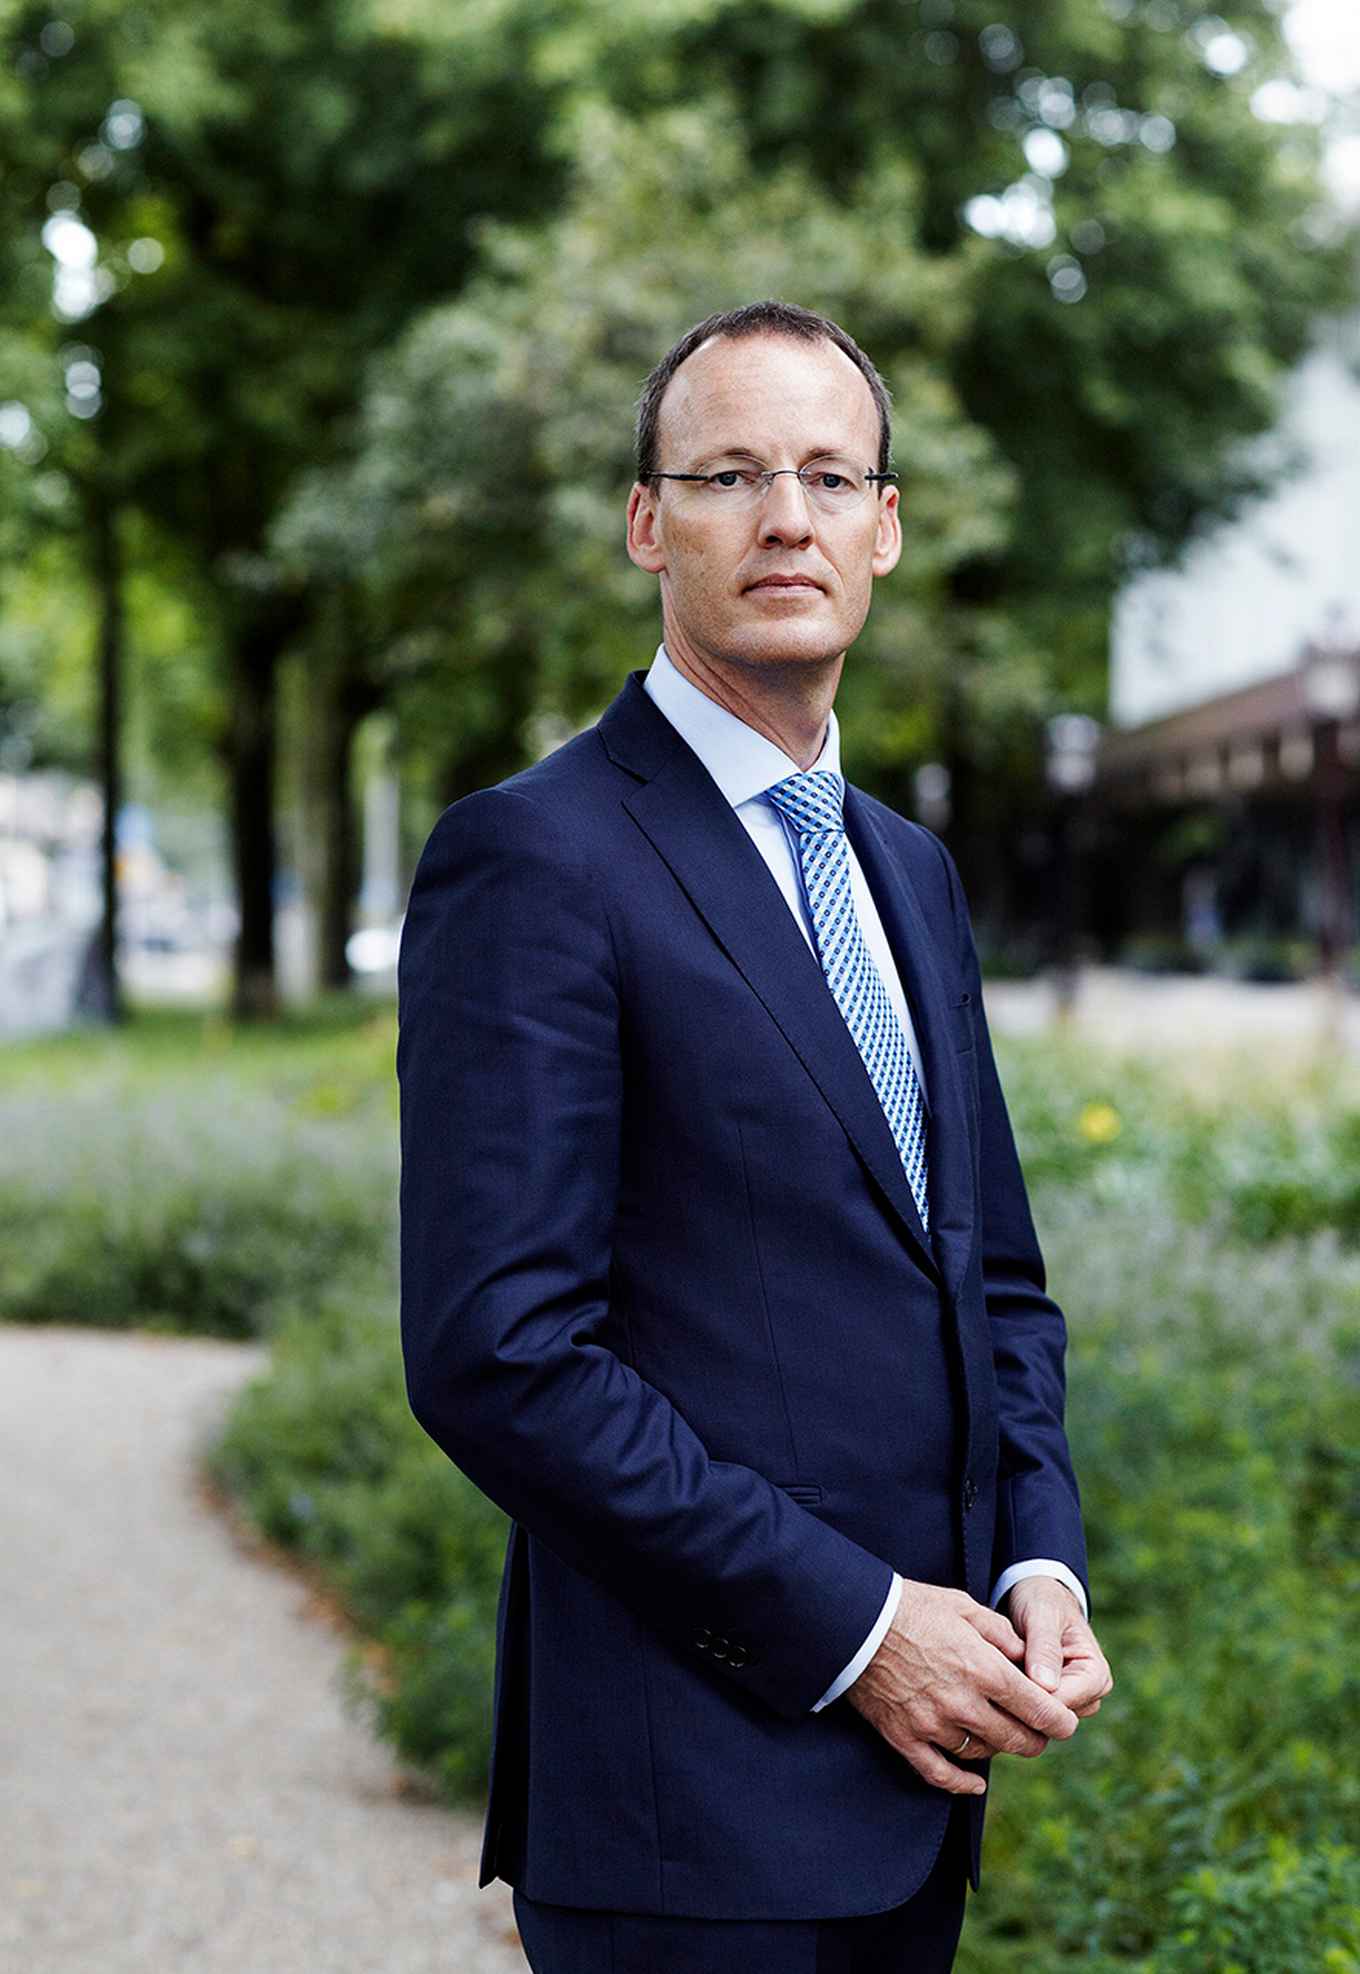 Photo from Klaas Knot - president of the Nederlandsche Bank